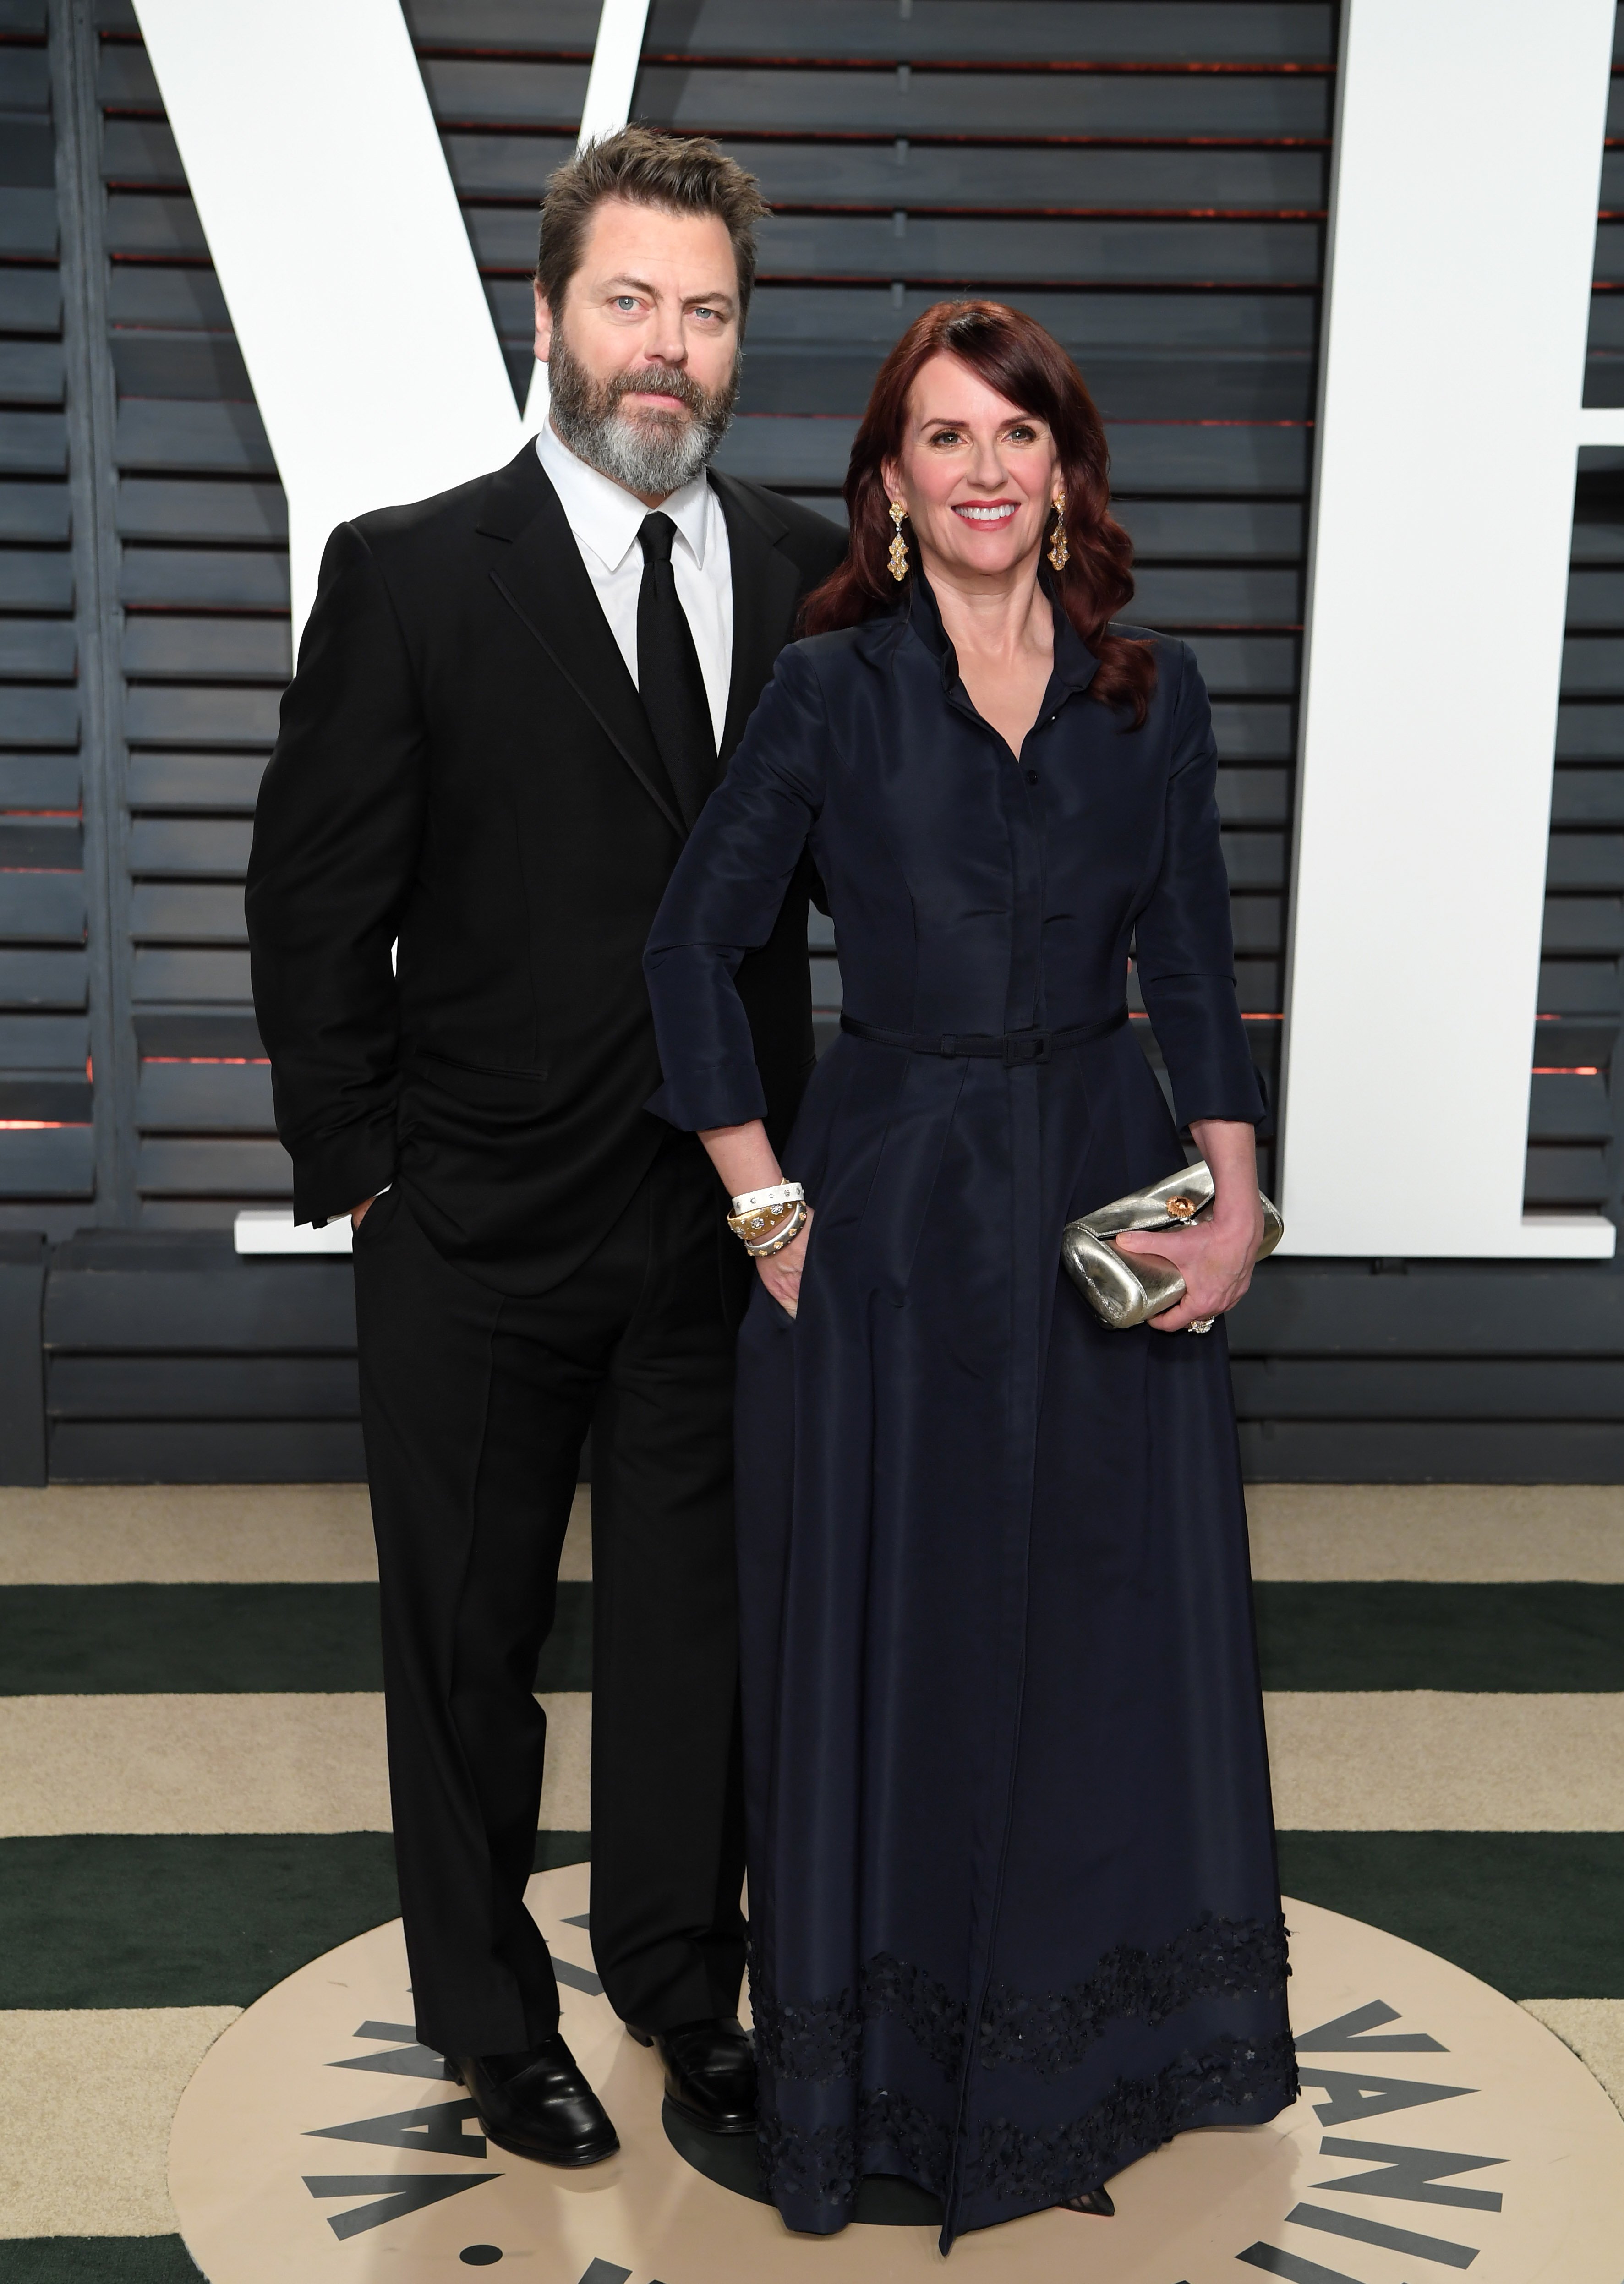  Nick Offerman and Megan Mullally arrive for the Vanity Fair Oscar Party hosted by Graydon Carter at the Wallis Annenberg Center for the Performing Arts on February 26, 2017, in Beverly Hills, California. | Source: Getty Images.